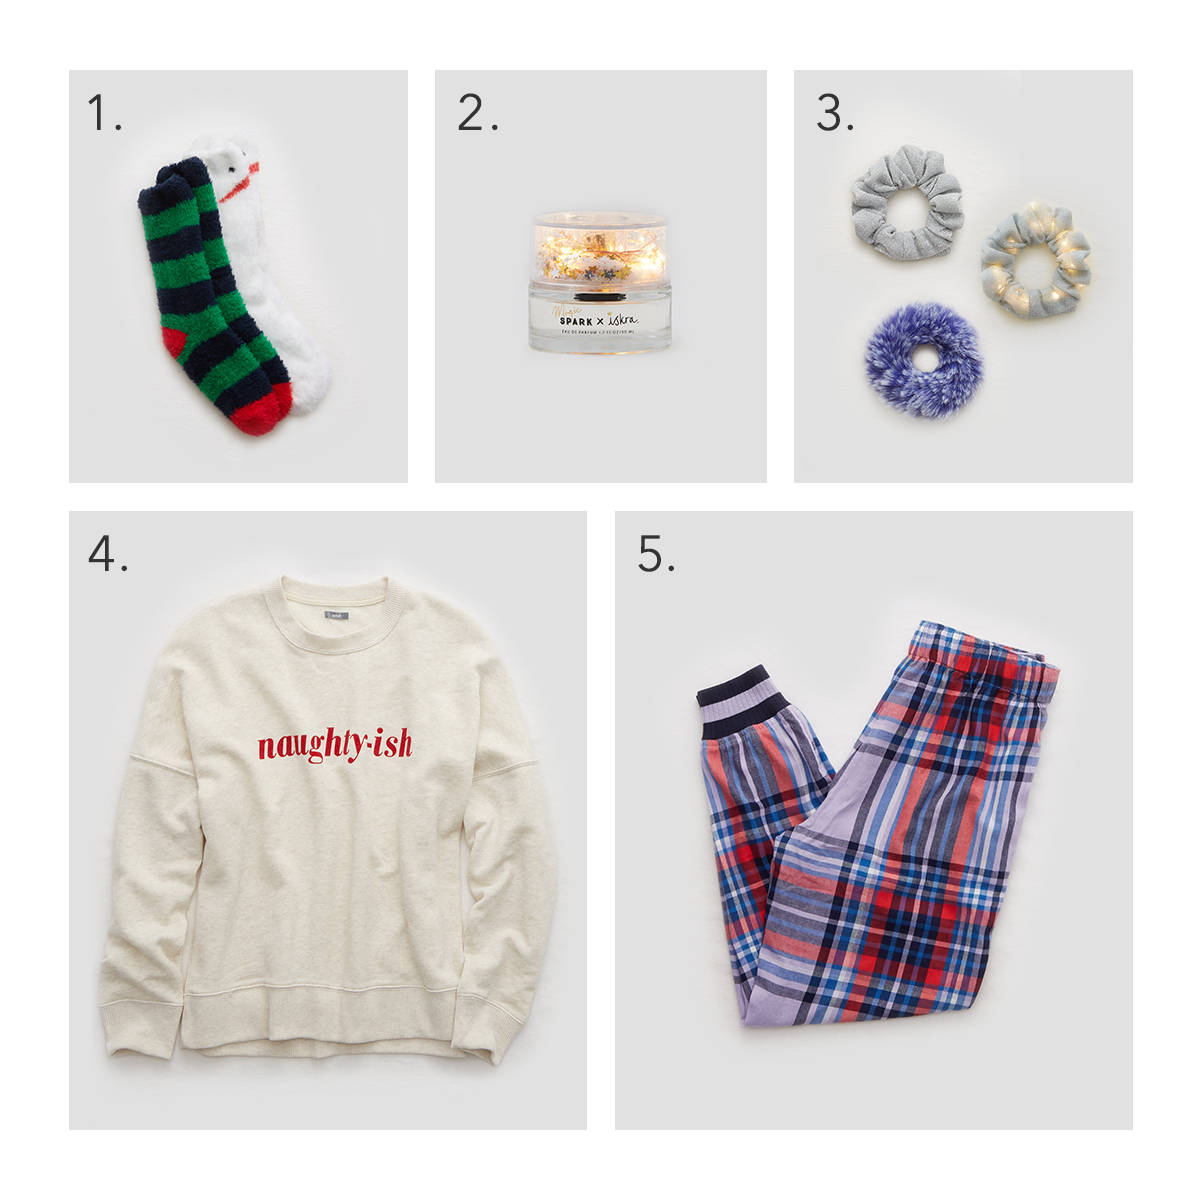 Iskra's 5 Fave Holiday Gifts